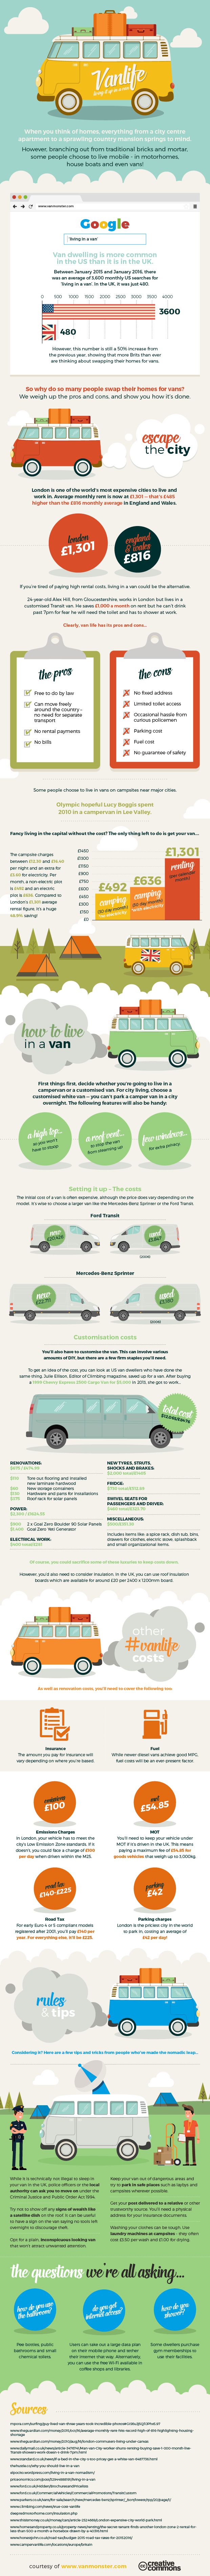 Infographic by Van Monster on living mobile in a van